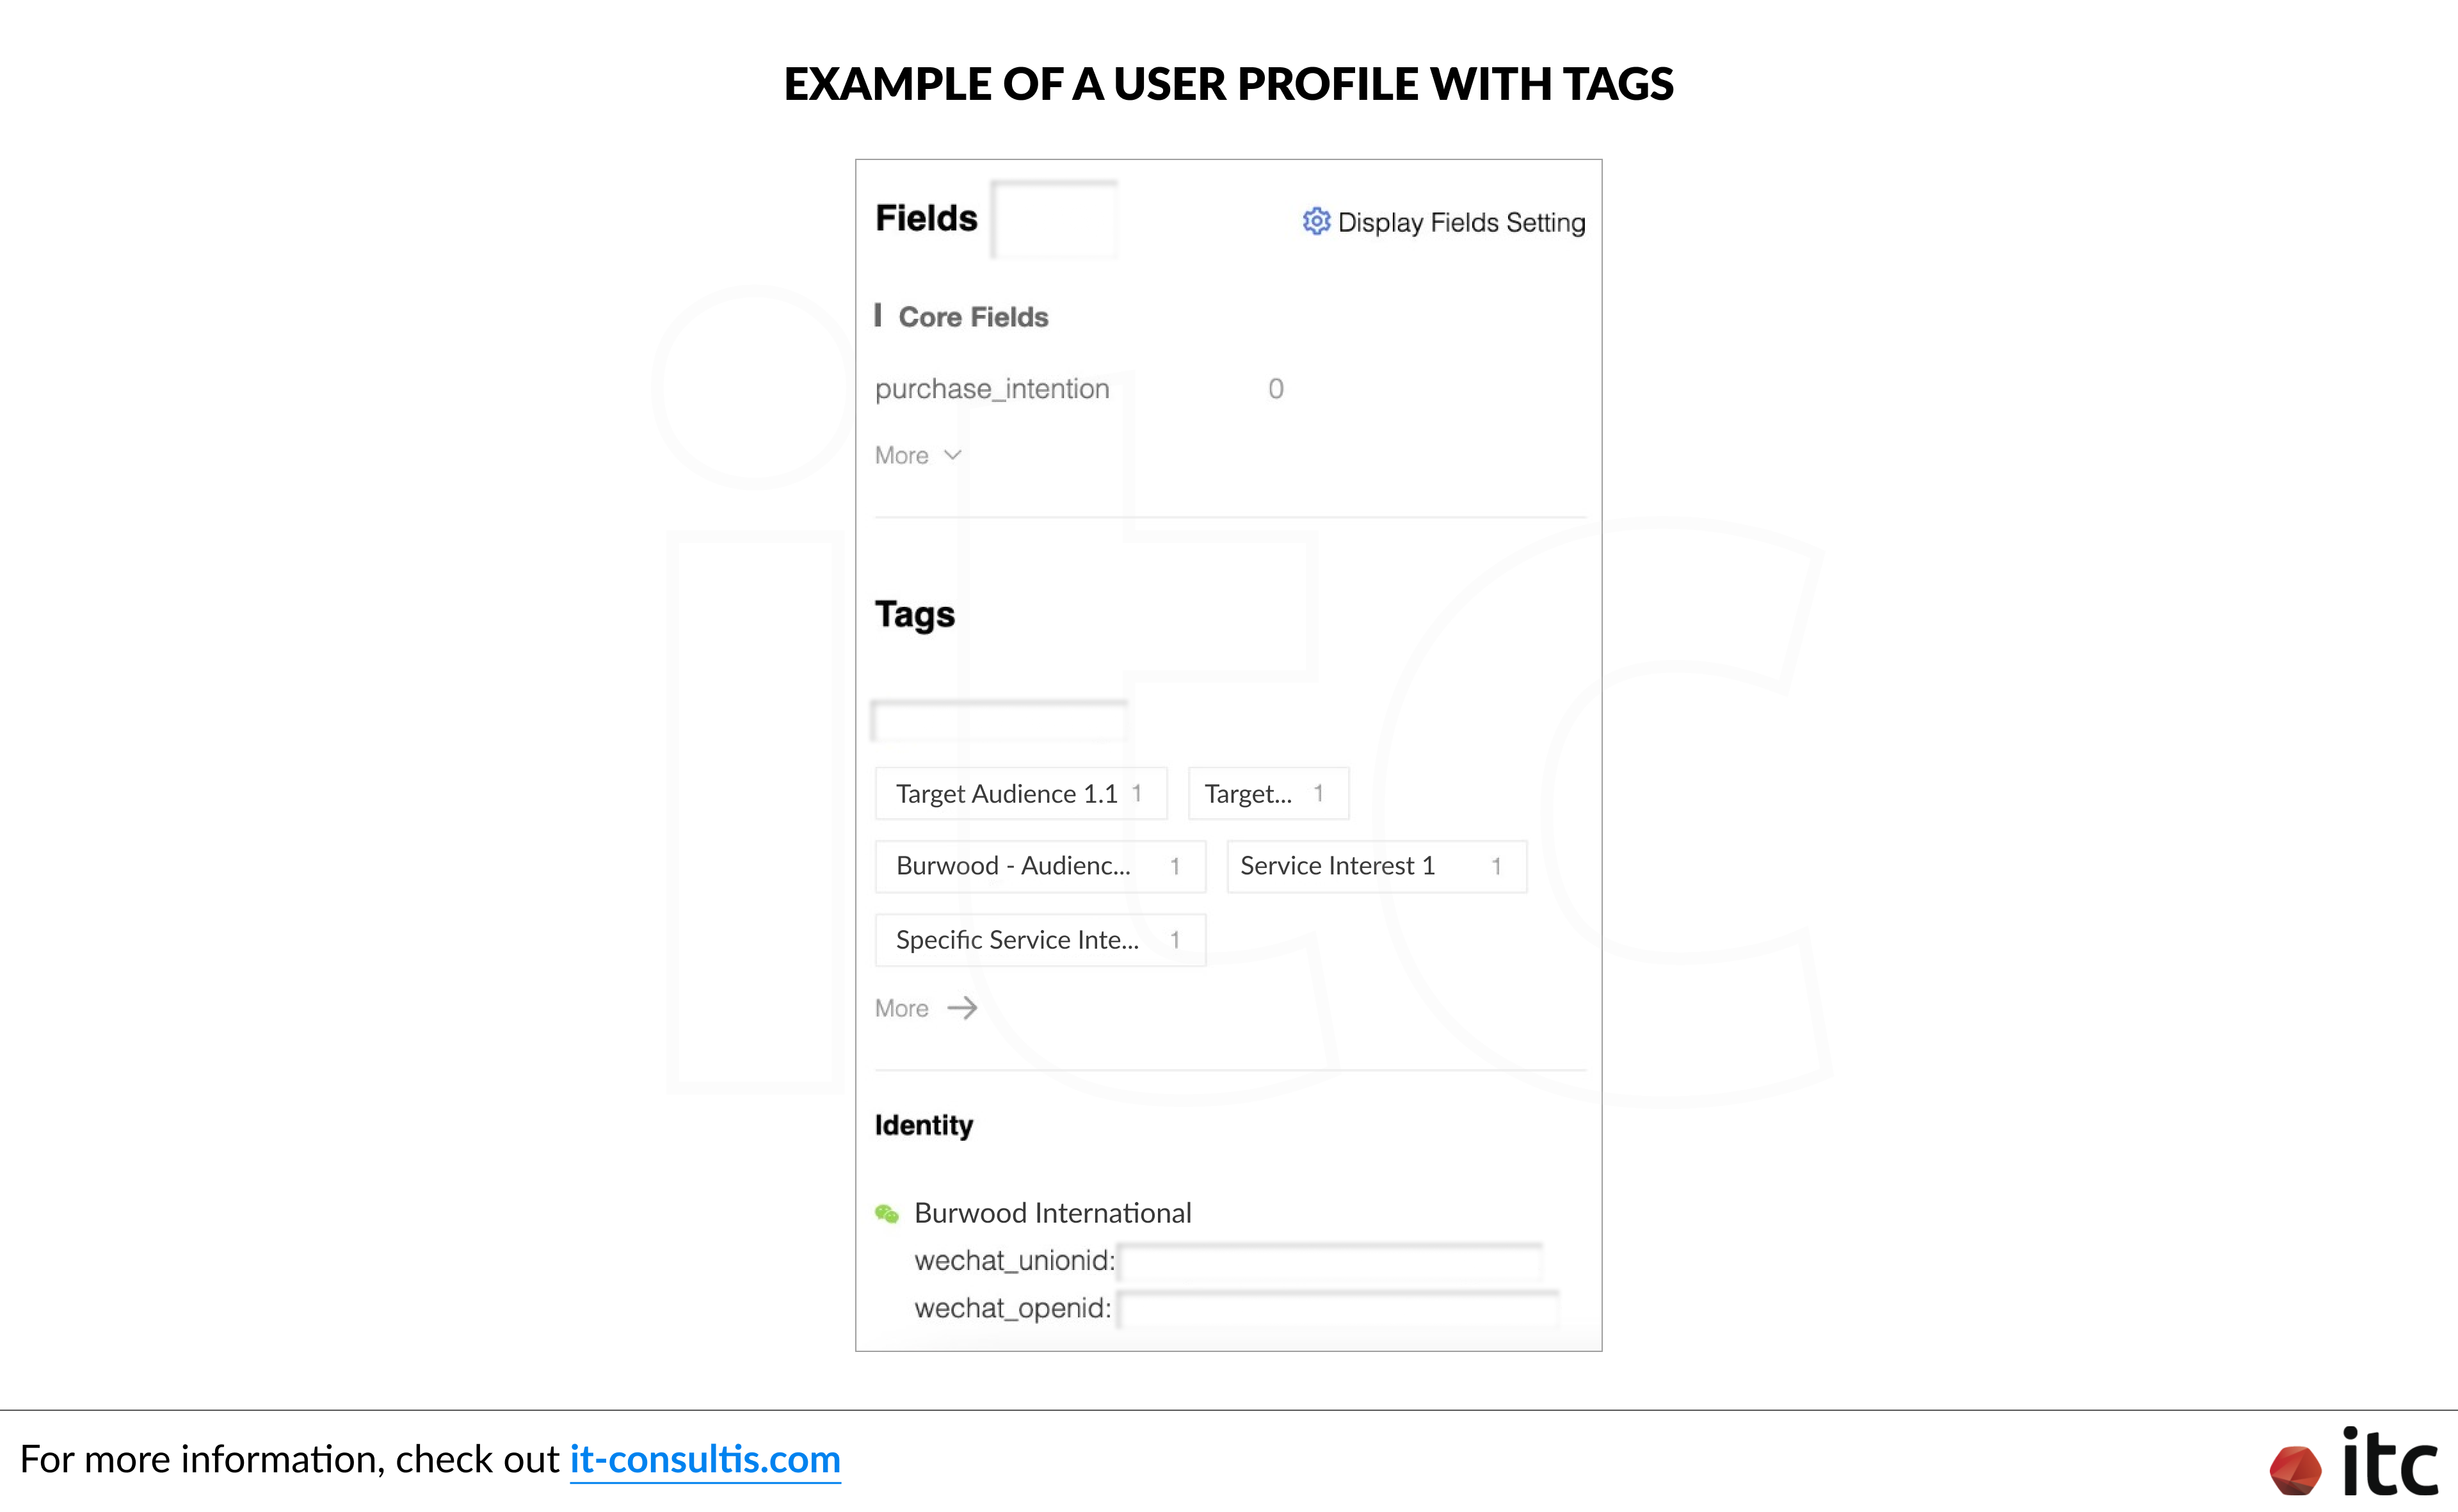 Example of an user profile with tags on a Social CRM tool - JingSocial